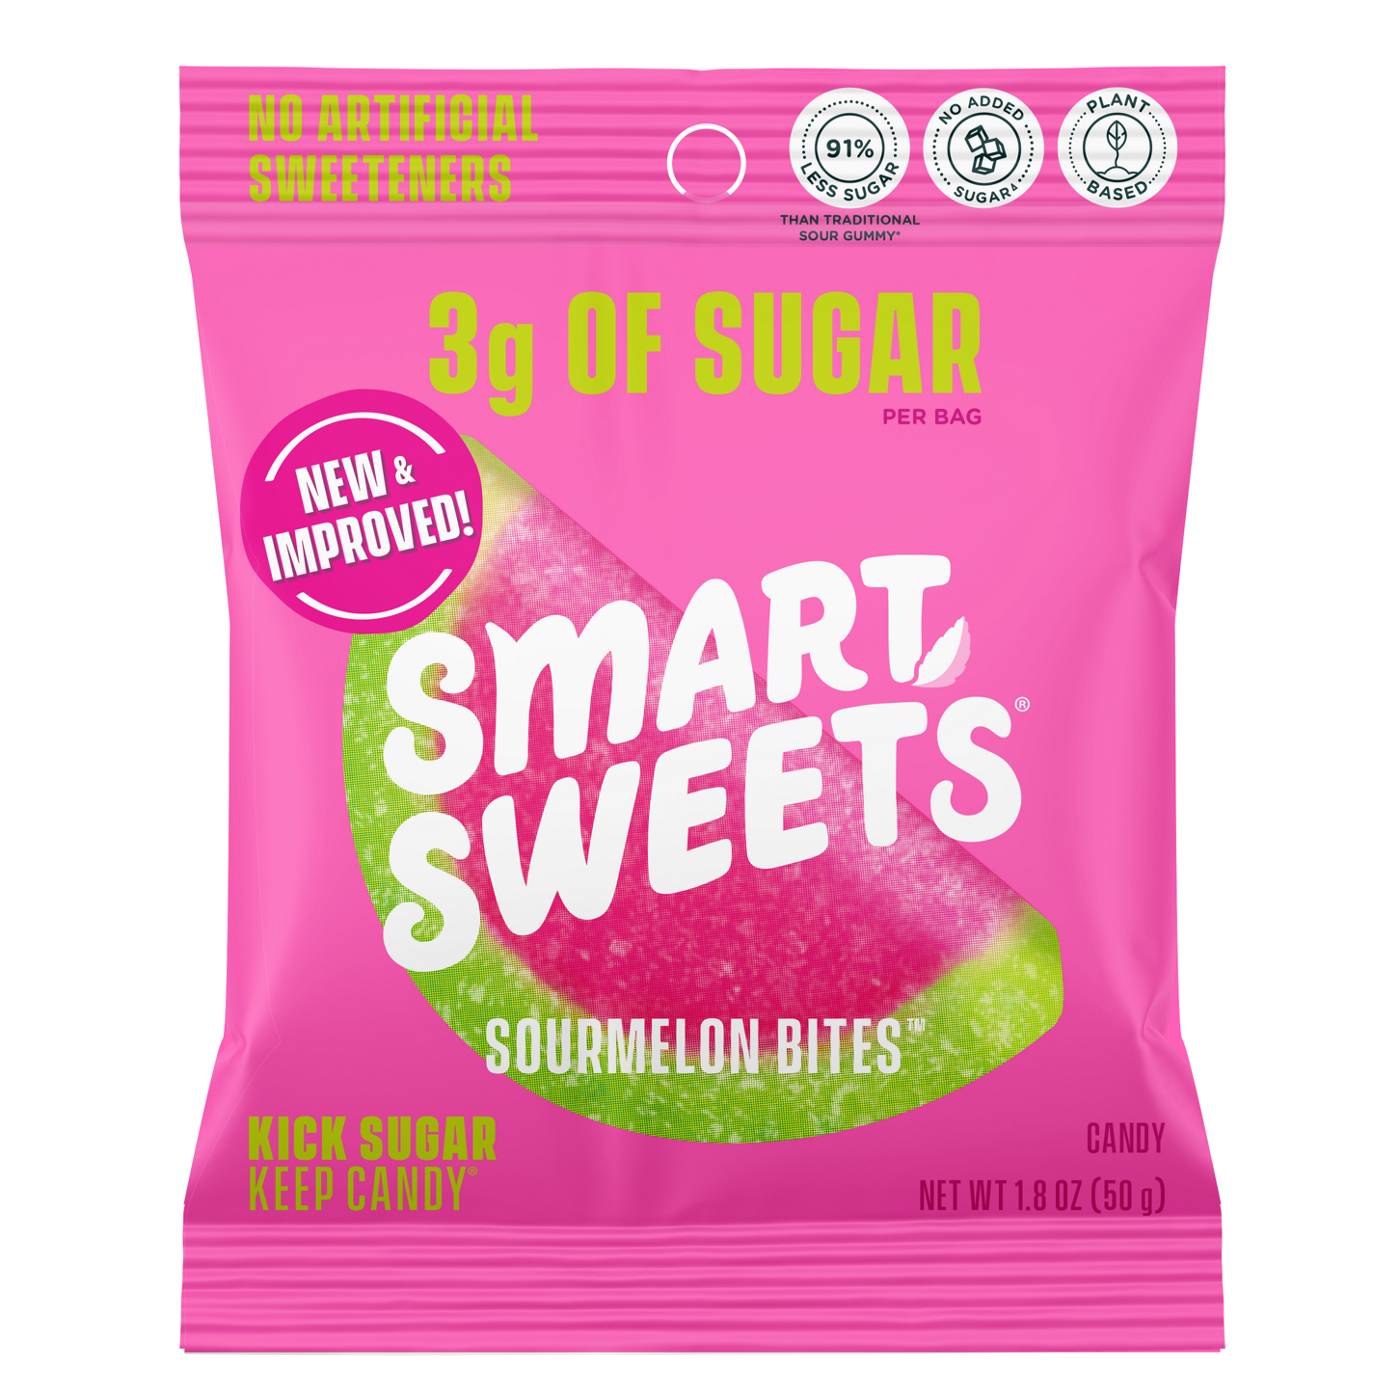 SmartSweets Sourmelon Bites Candy; image 1 of 3